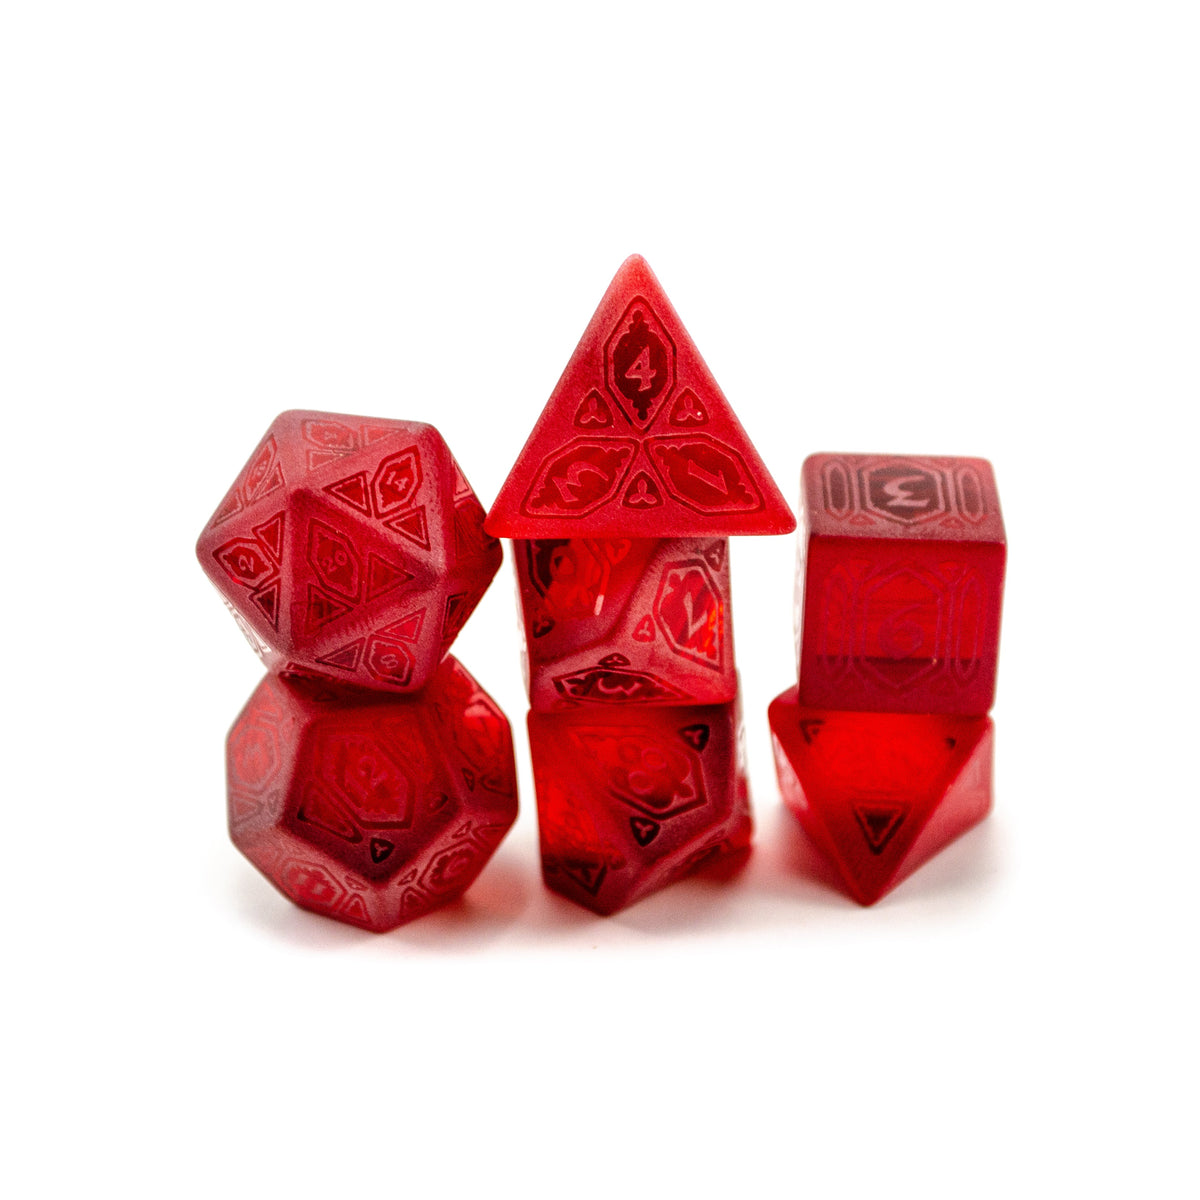 Level Up Dice - Cathedral Crown Crystal Red